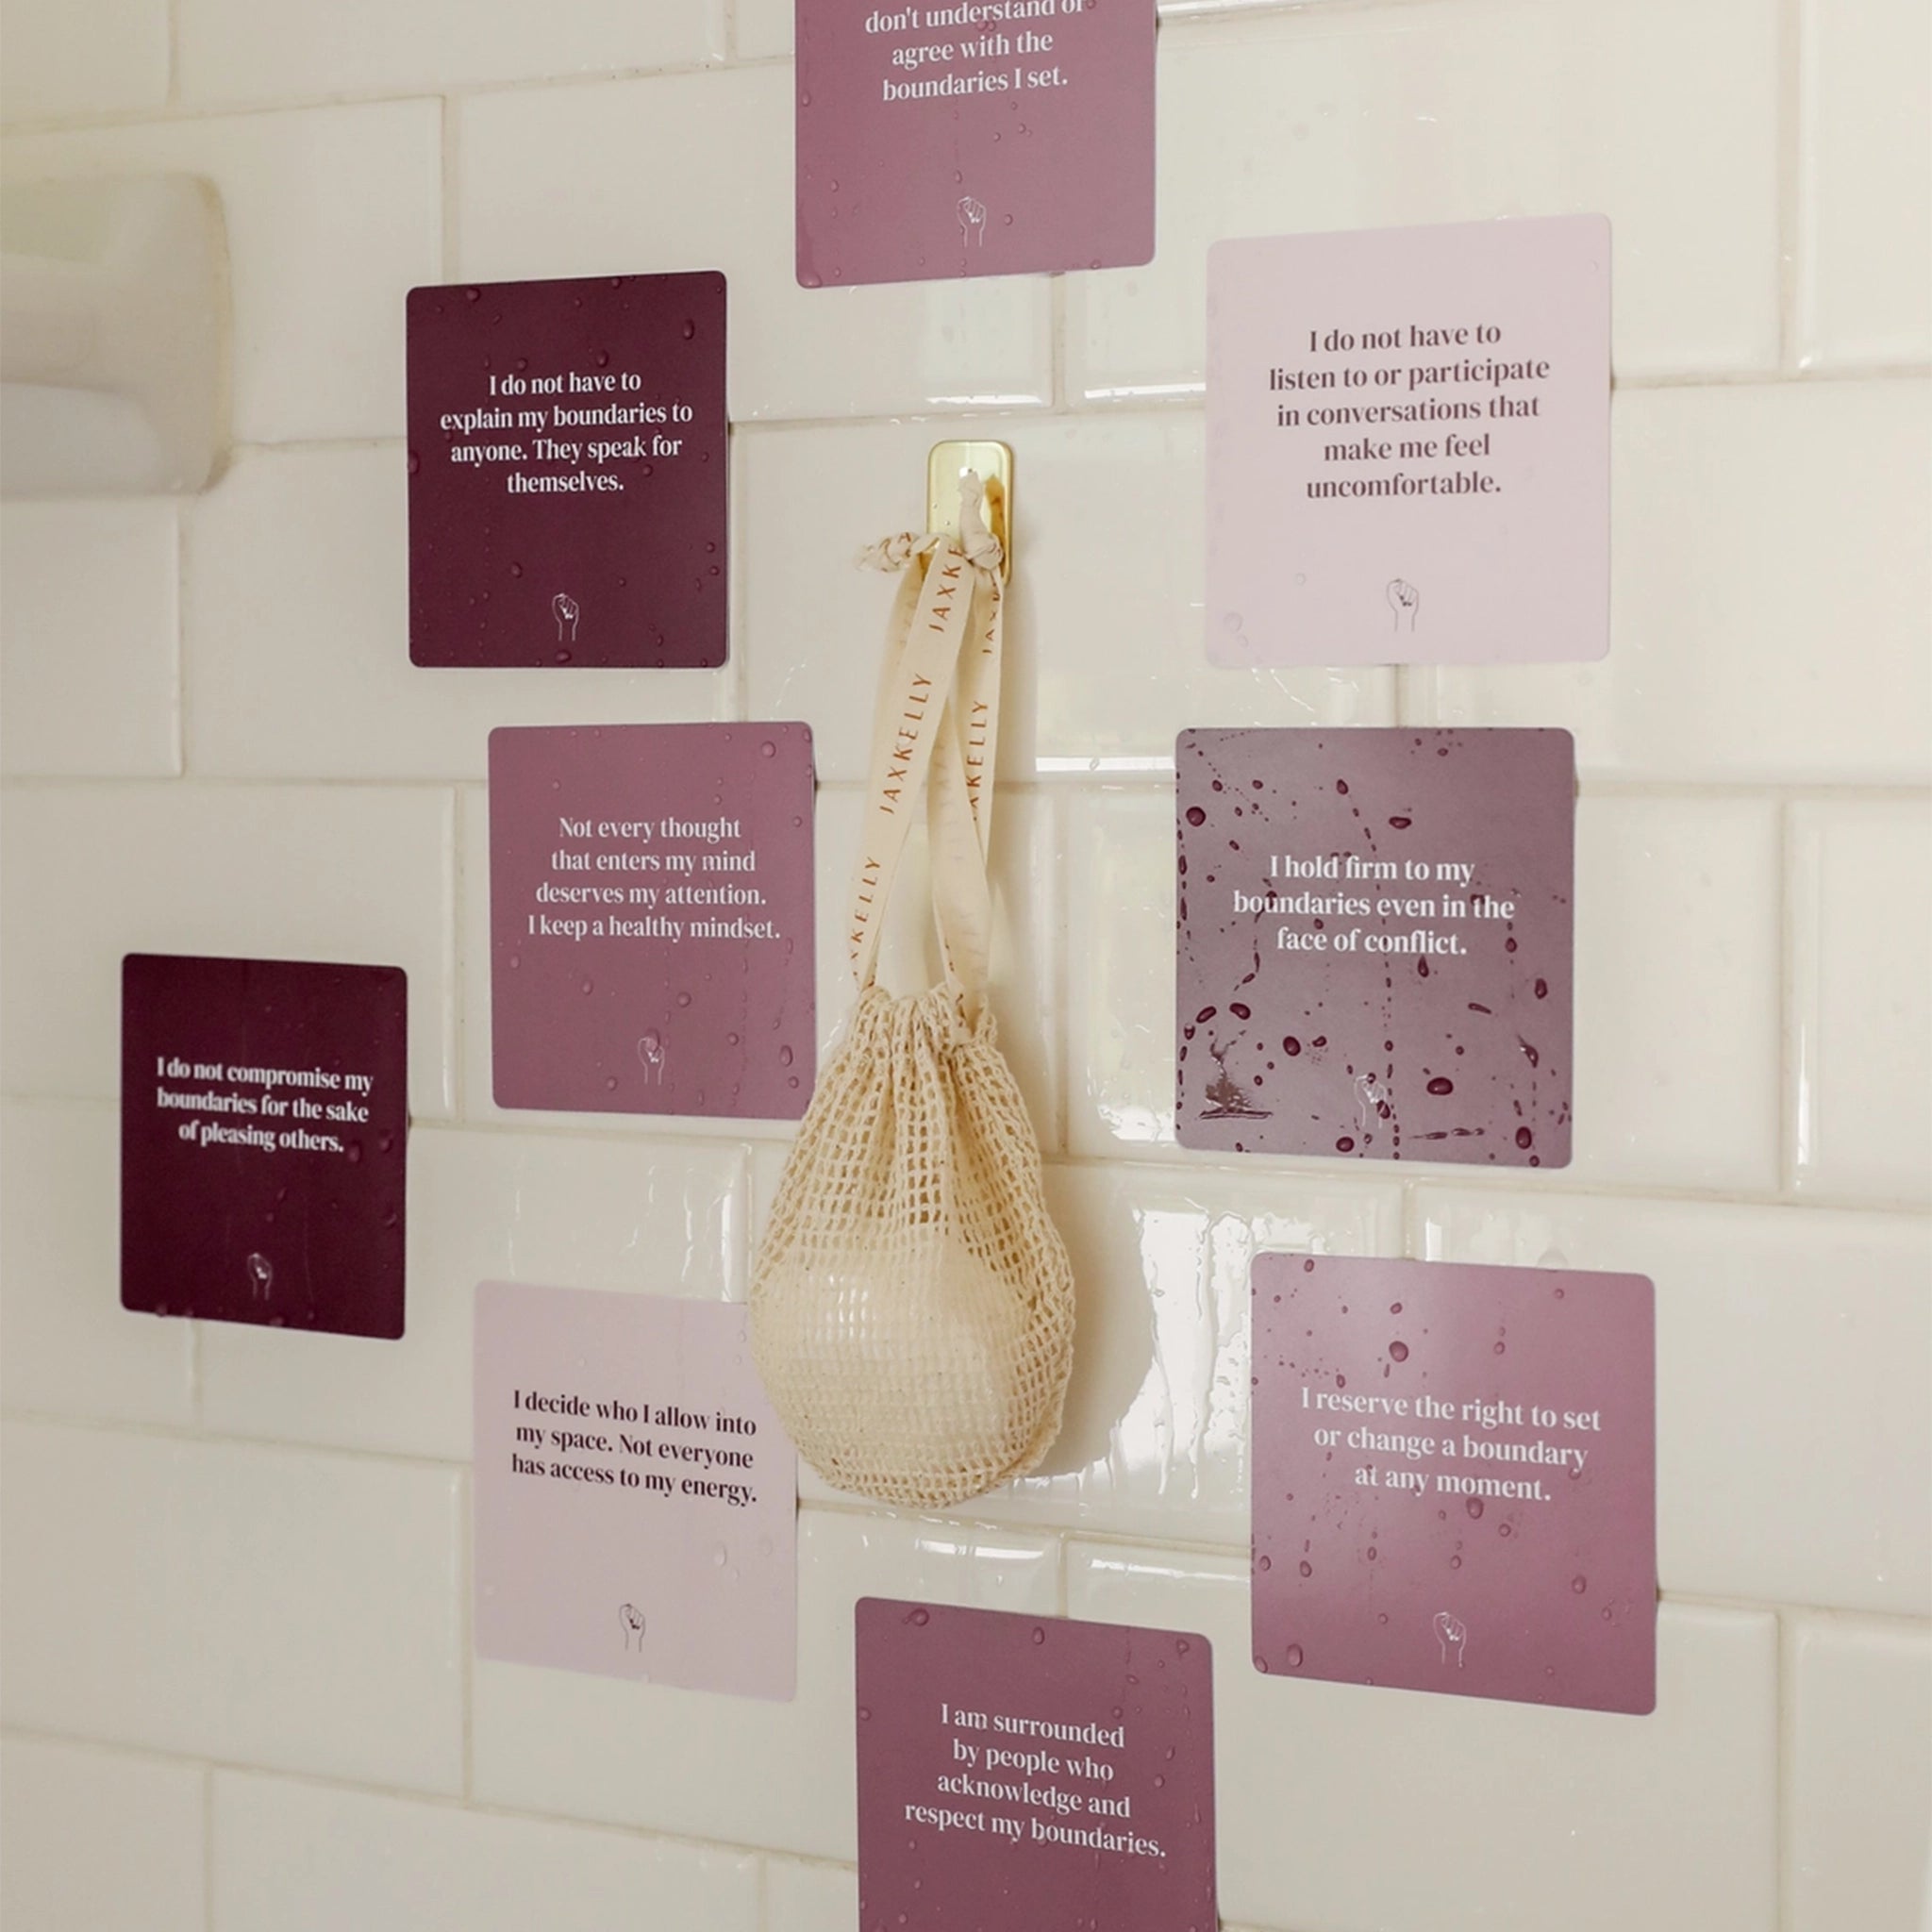 Various shades of purple waterproof cards with have affirmation quotes on each one related to healthy boundaries along with a shower steamer.